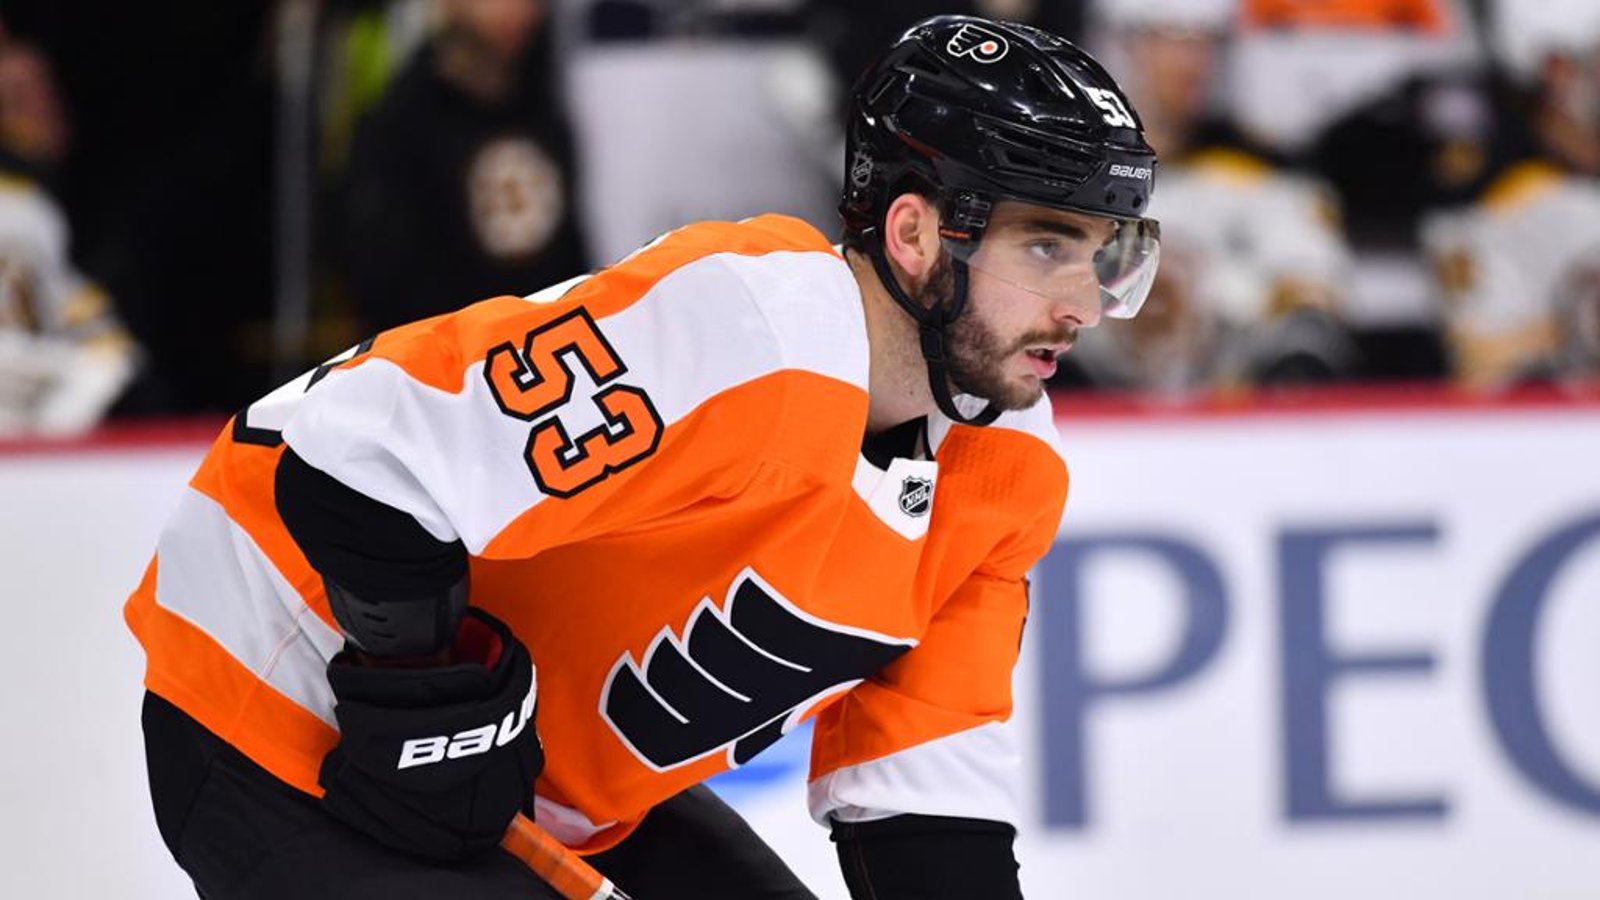 Shayne Gostibehere now knows his fate